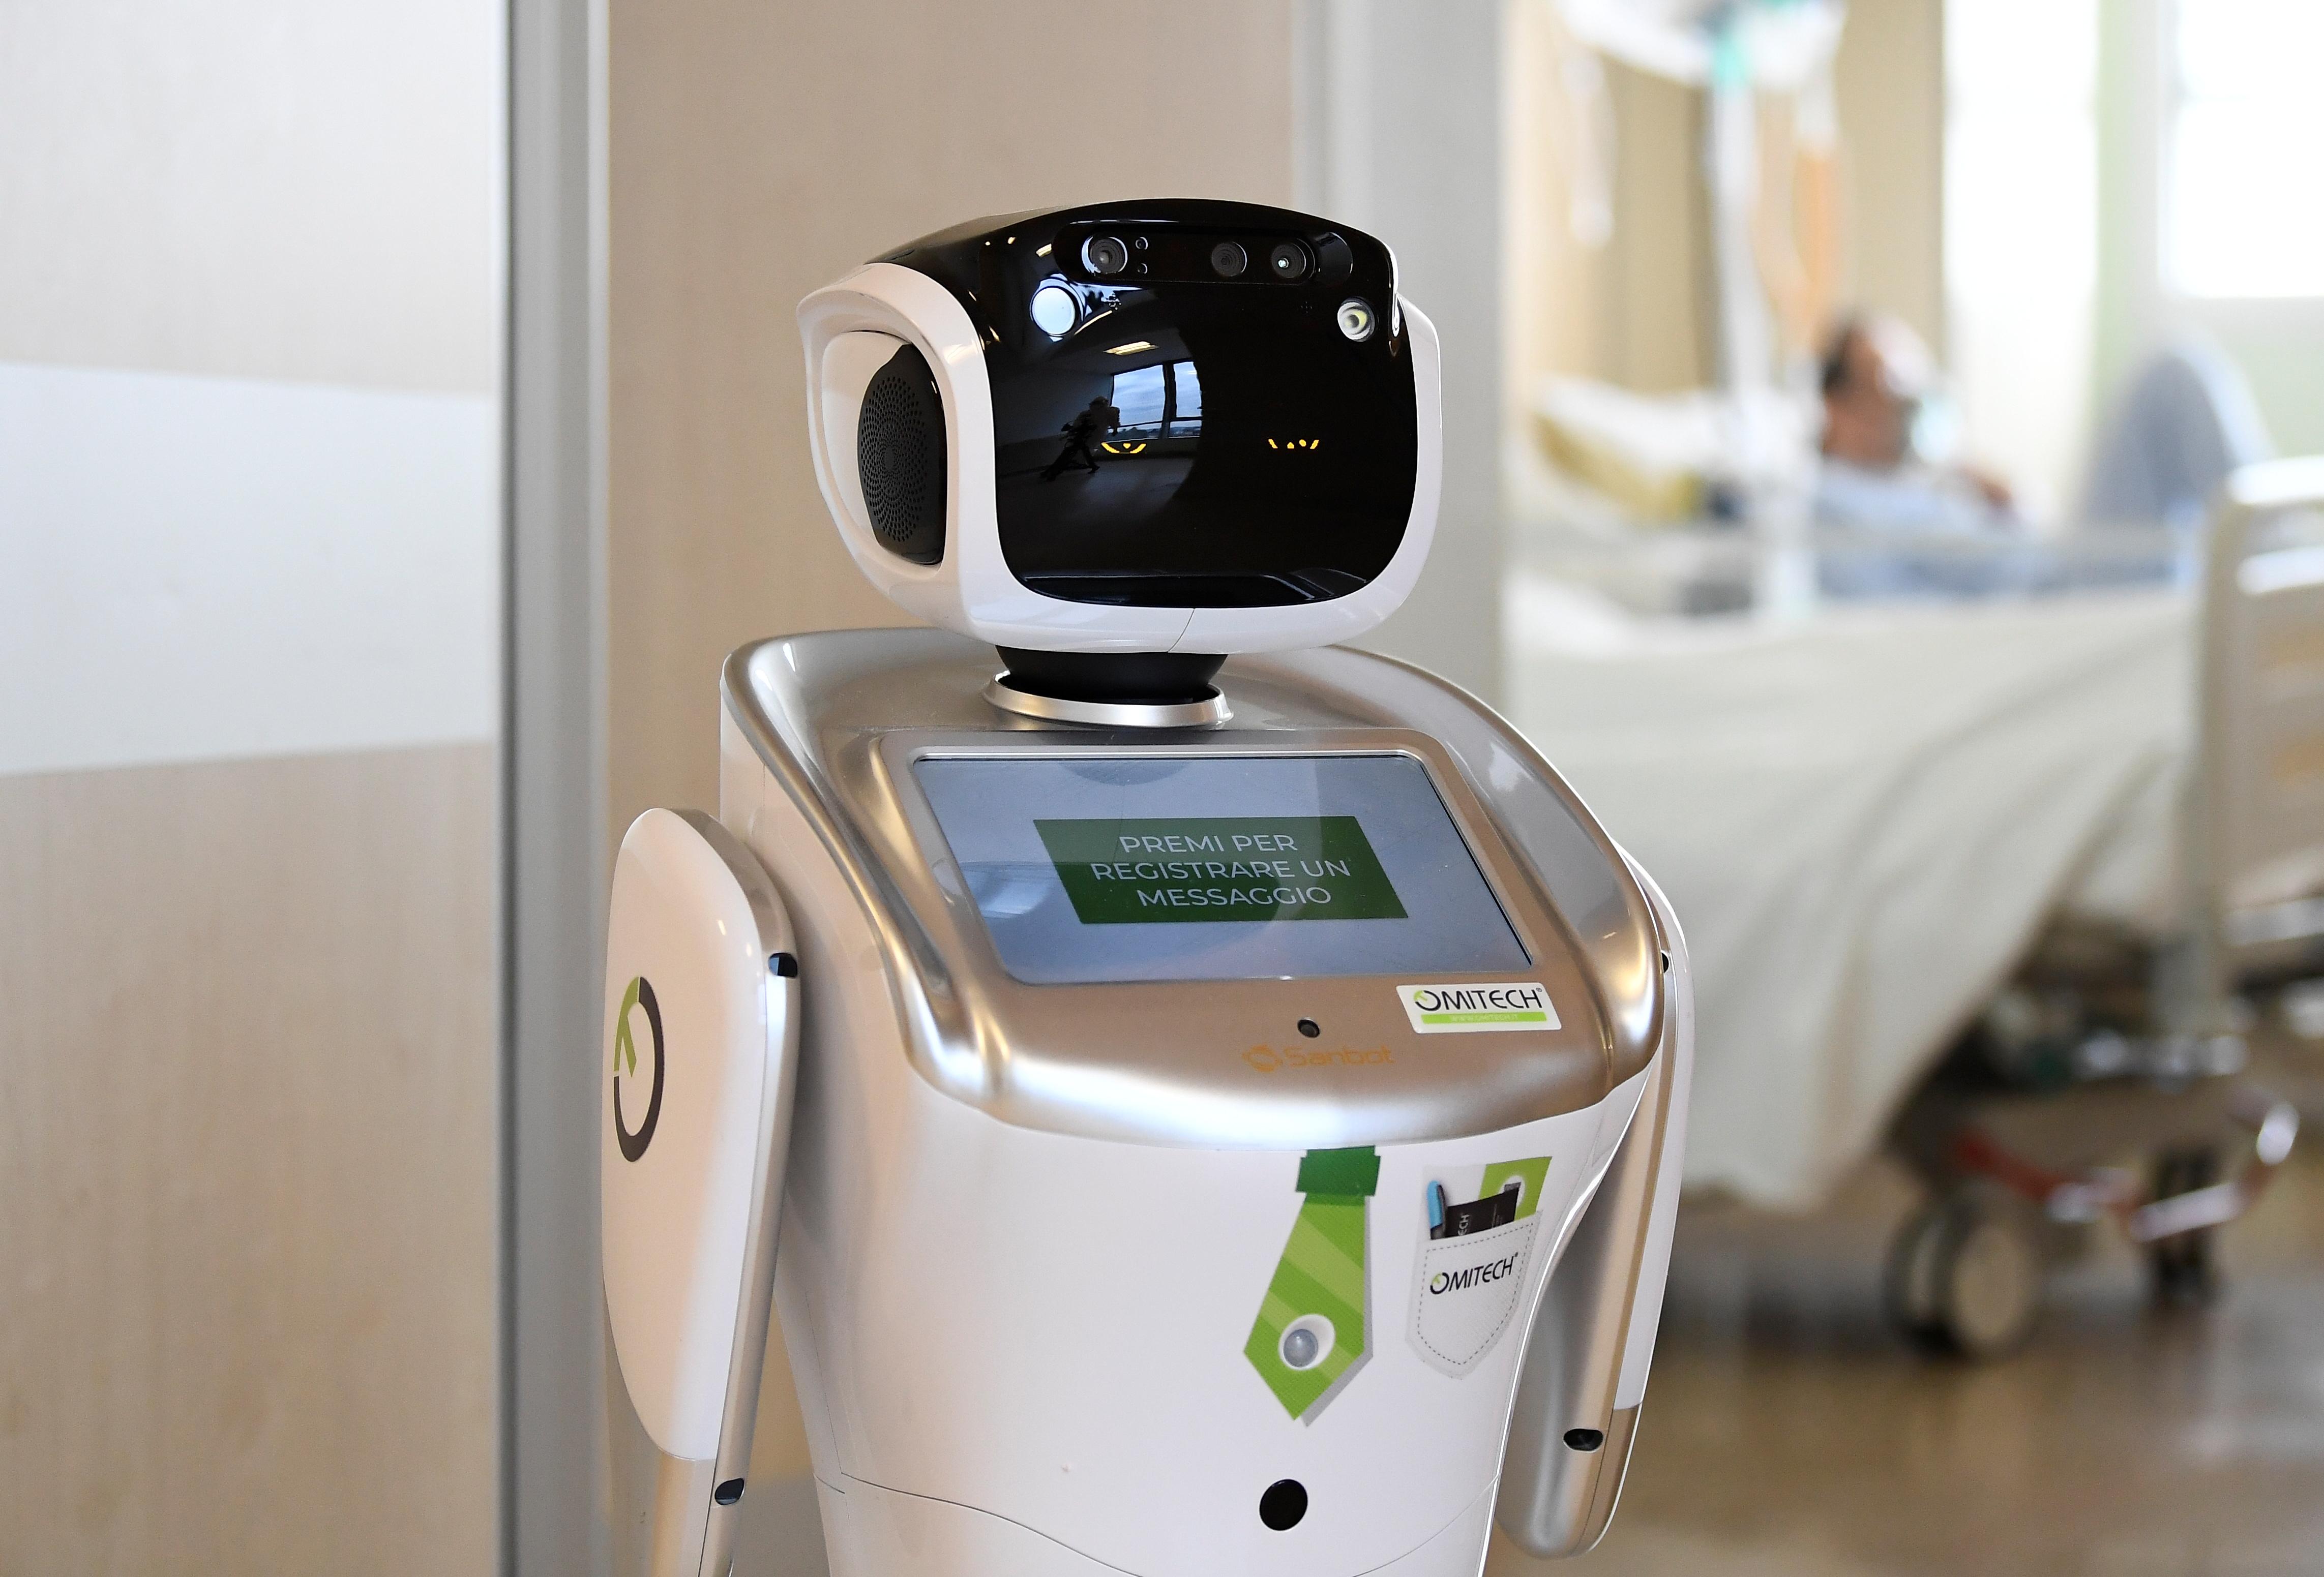 A robot helping medical teams treat patients suffering from the coronavirus disease (COVID-19) is pictured at the corridor, in the Circolo hospital, in Varese, Italy April 1, 2020. Photo: Reuters